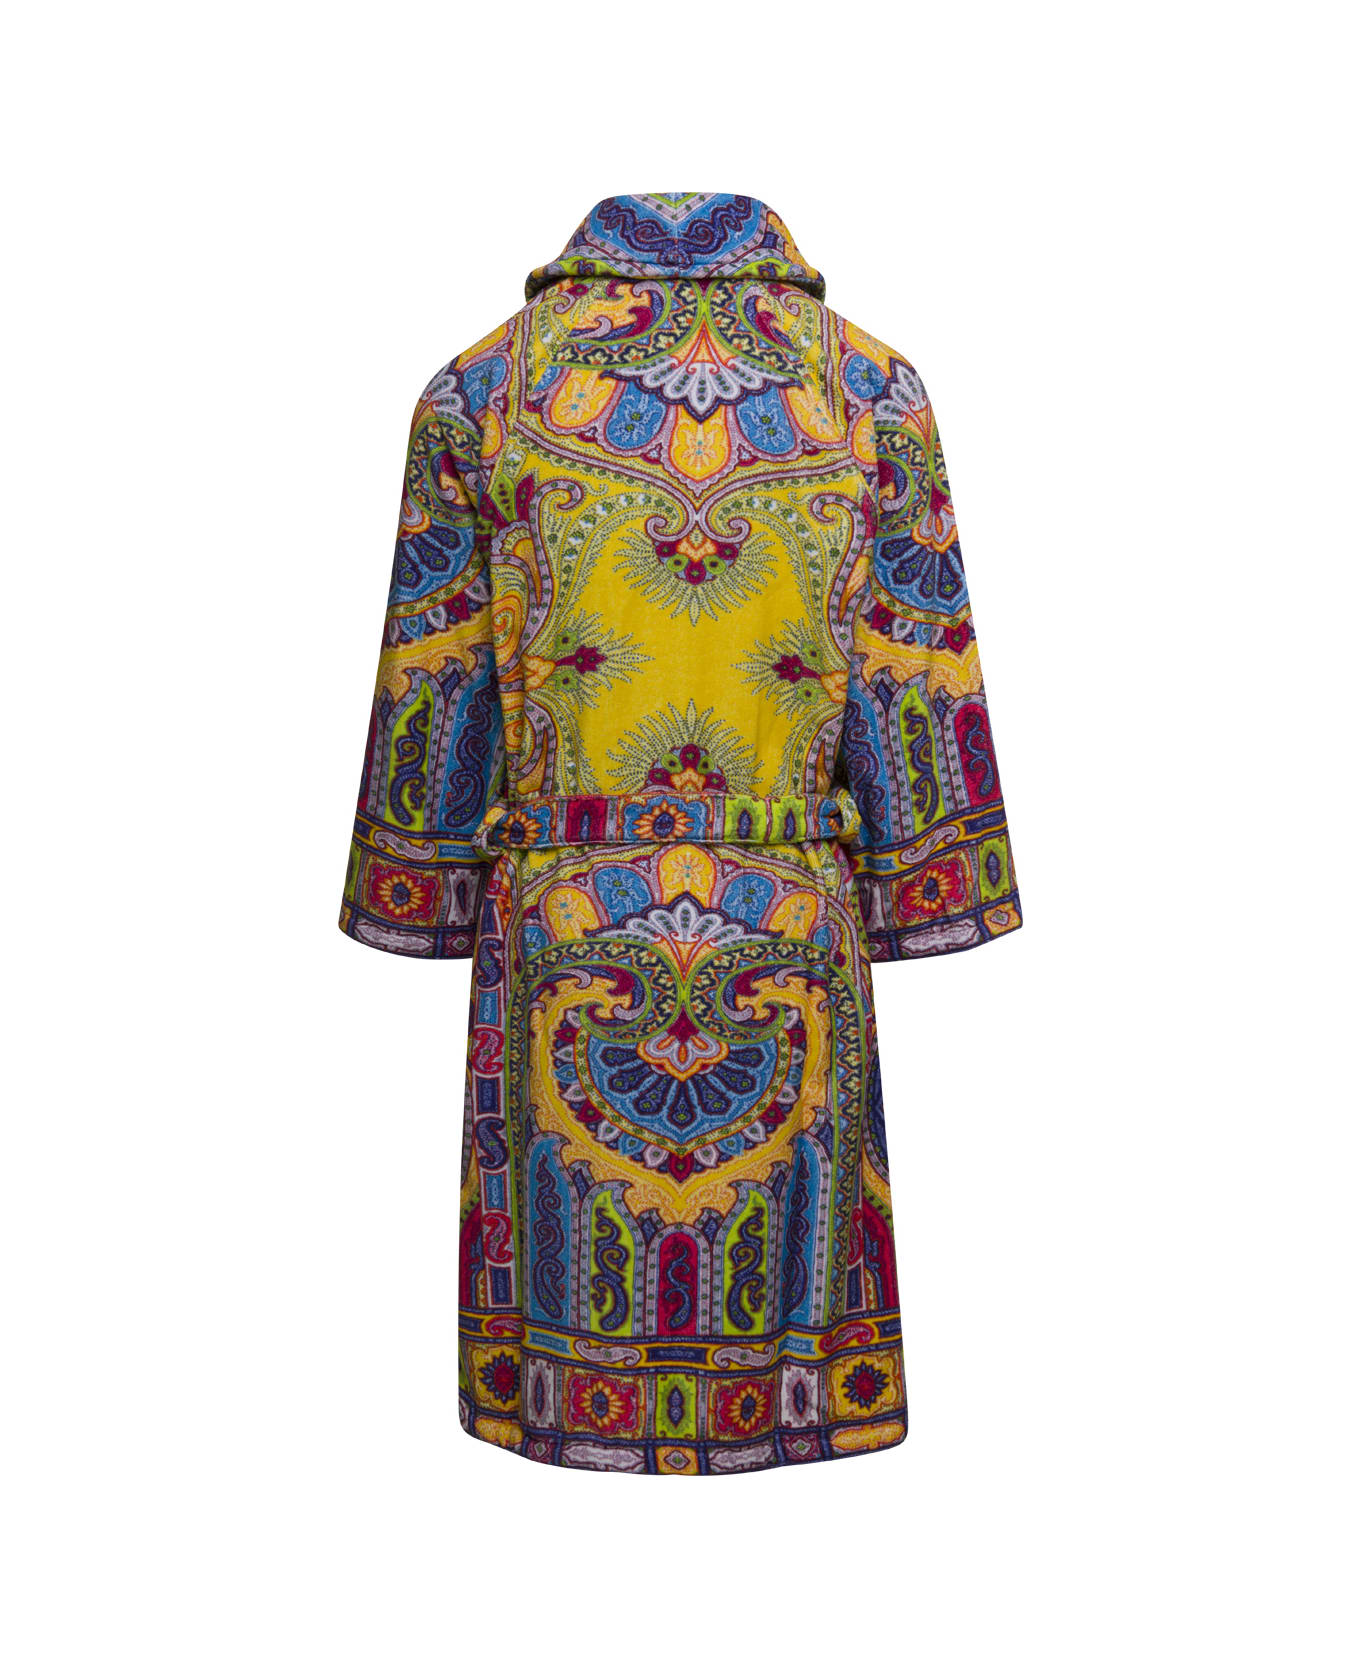 Etro 'new Tradition' Multicolor Bath Robe With Pailsey Motif Home - Yellow